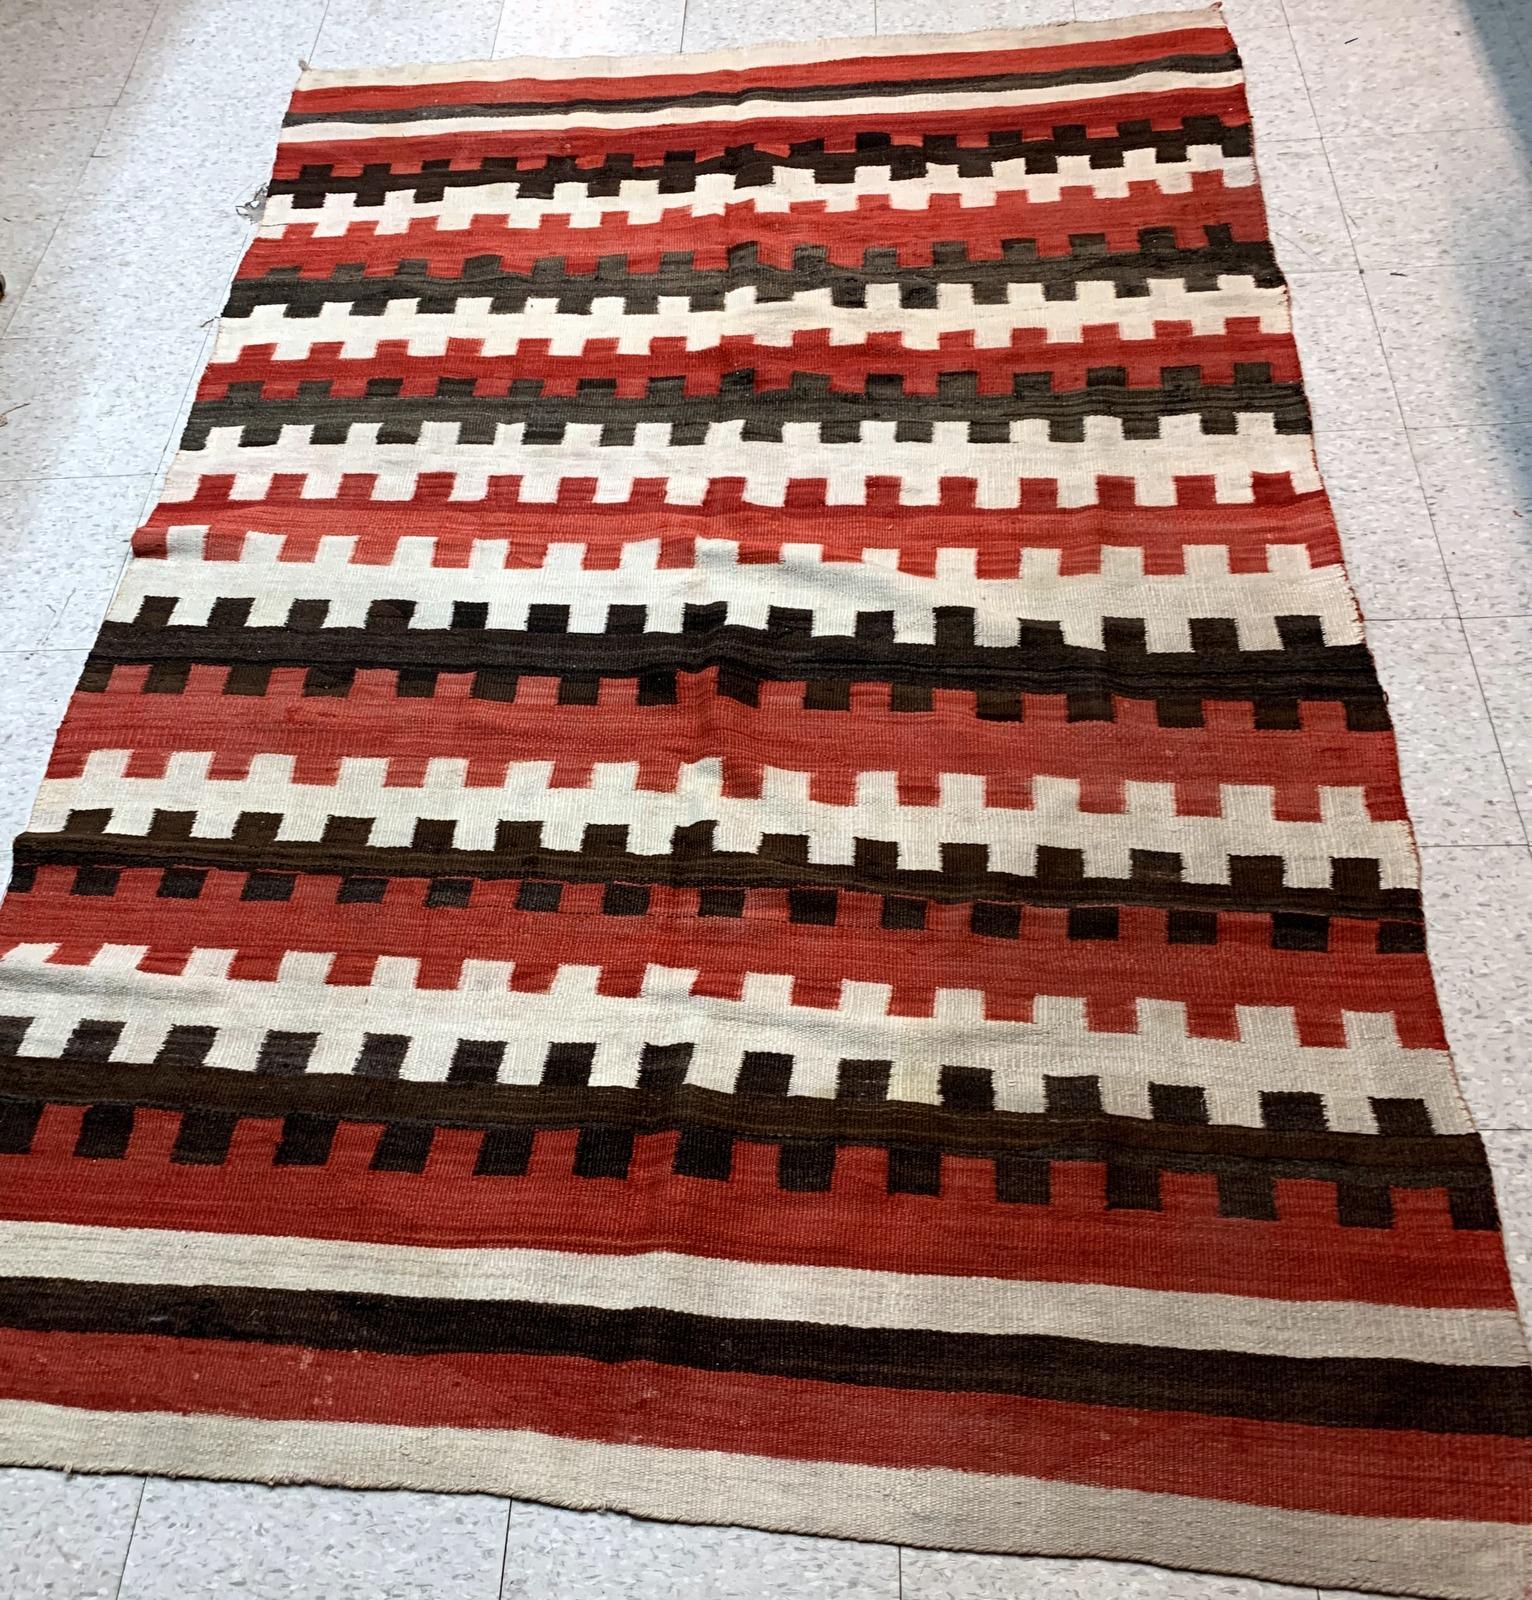 Antique hand-woven American-Indian Navajo blanket in original good condition. The blanket has been made in the end of 19th century in bright red, chocolate brown and white shades.

-condition: original good,

-circa: 1870s,

-size: 5.7' x 6.6'